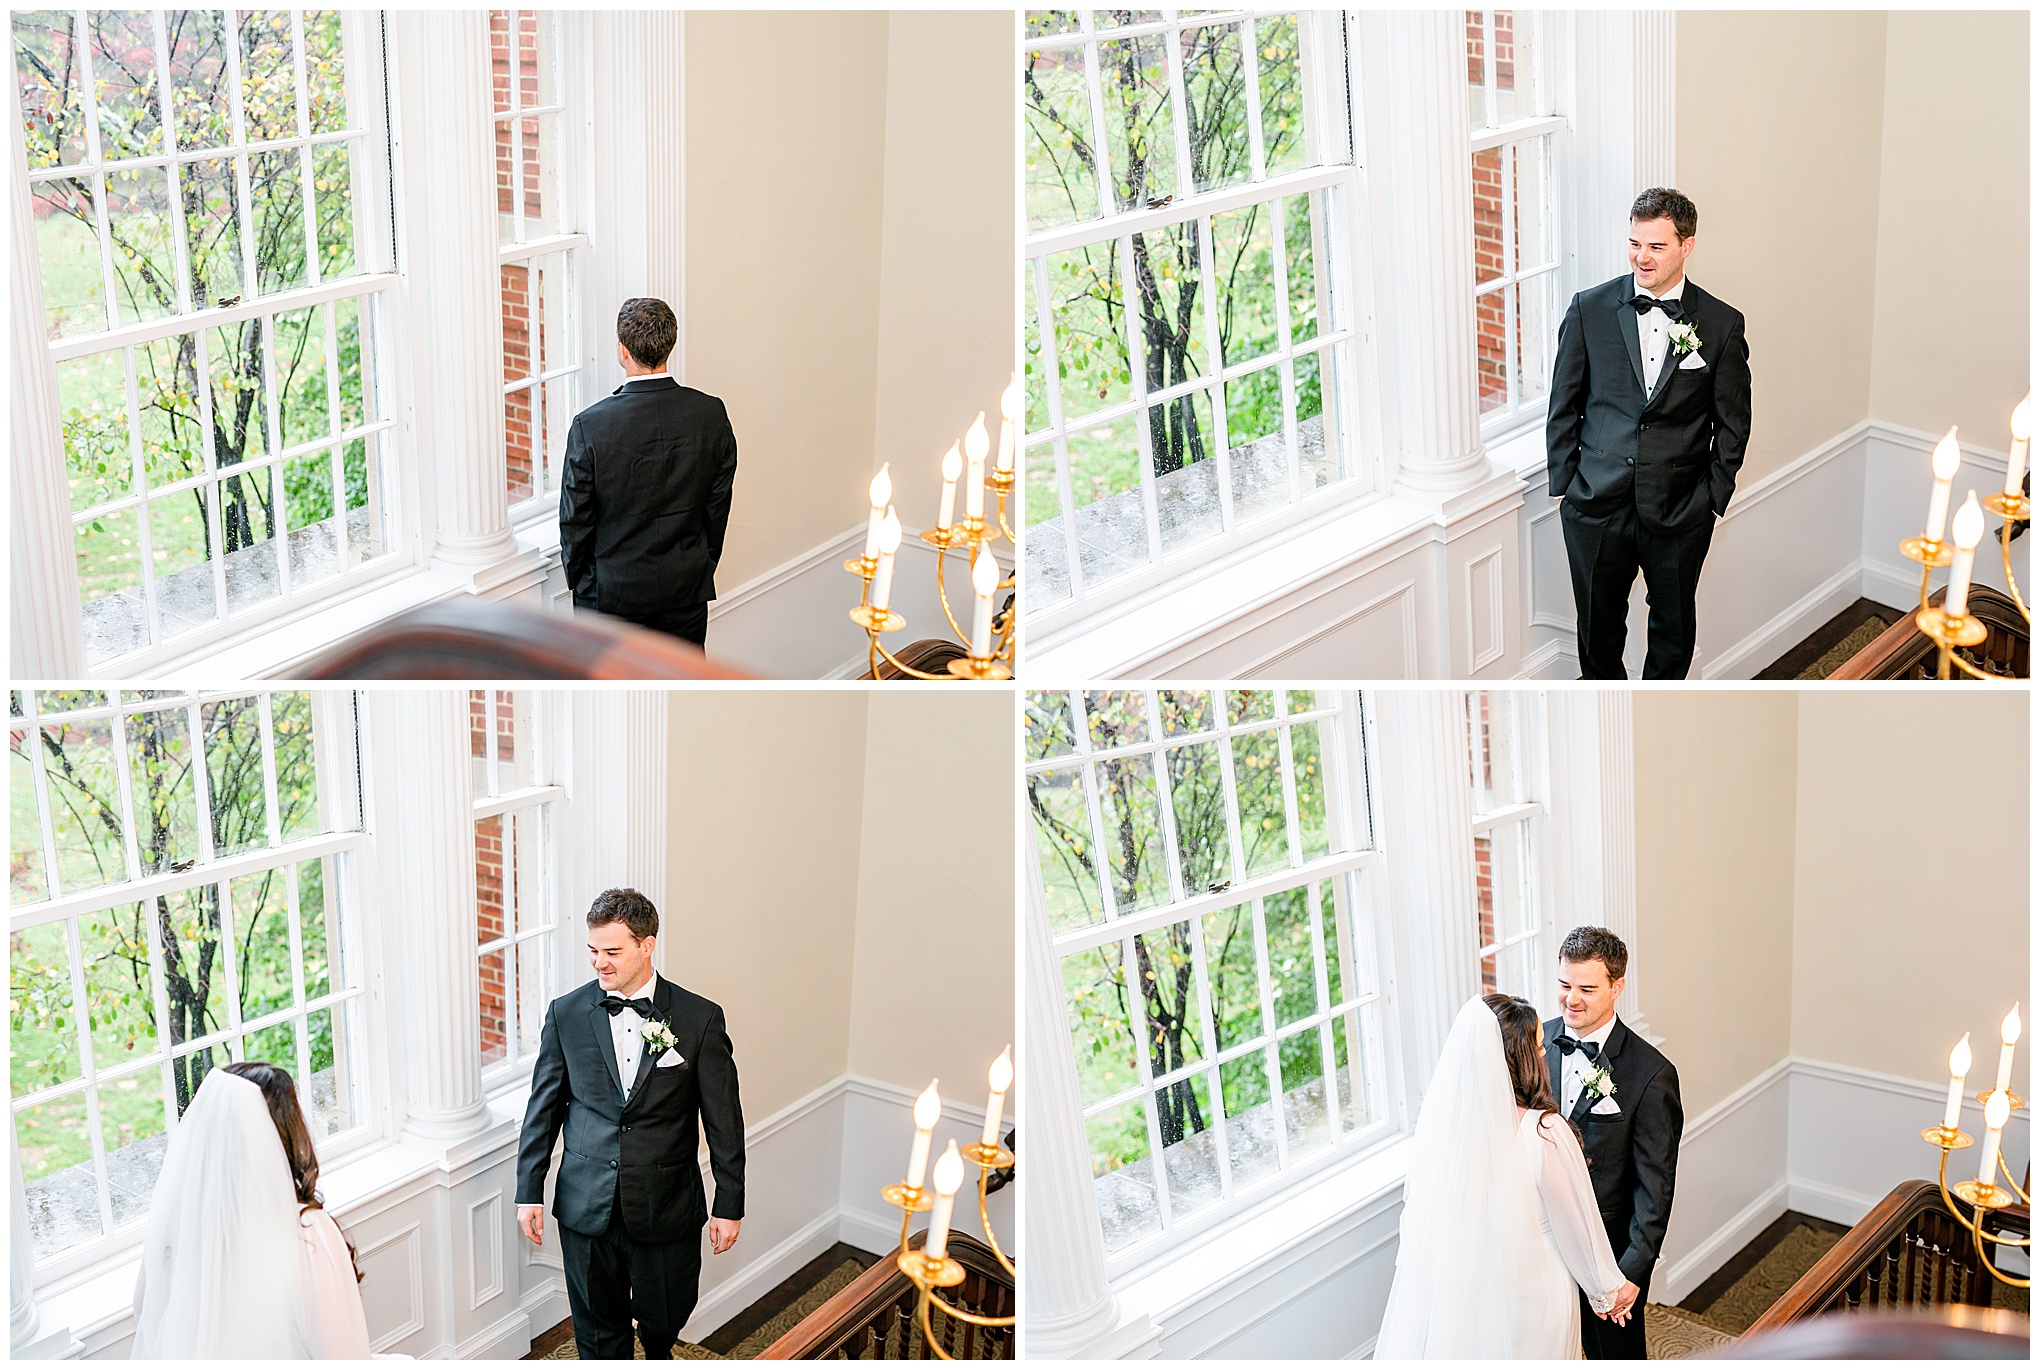 emerald and ivory Woodend Sanctuary wedding, autumn Woodend Sanctuary wedding, rainy day wedding, Maryland wedding venues, Chevy Chase MD wedding venue, mansion wedding, manor house wedding, indoor wedding, DC wedding venue, DC wedding photographer, Baltimore wedding photographer, Rachel E.H. Photography, emerald and ivory aesthetic, groom on stairs, groom looking out window, bride and groom first look, first look